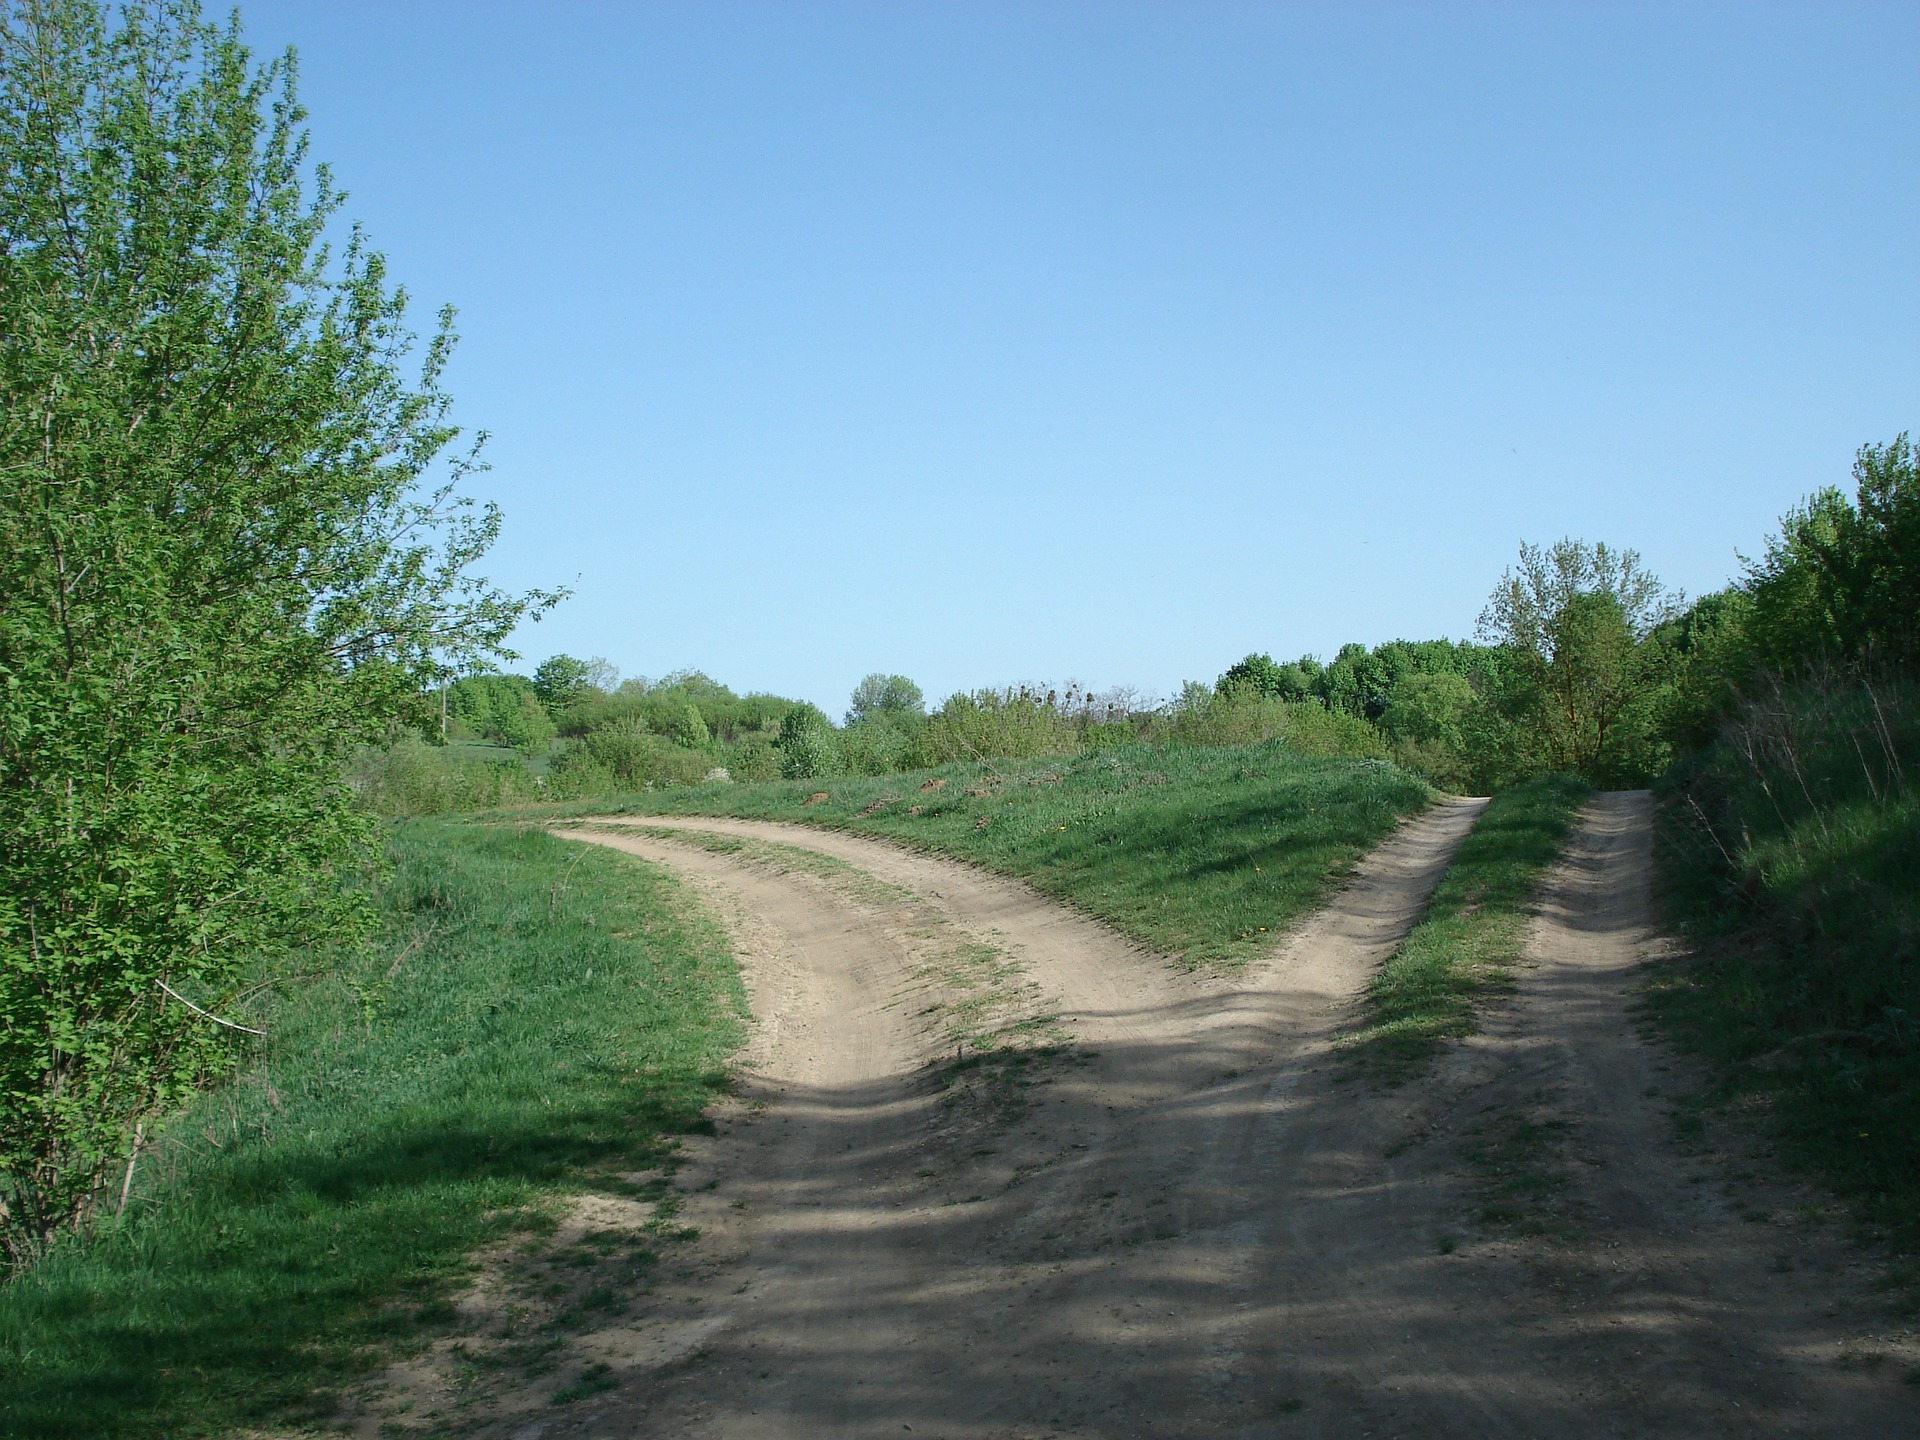 A dirt road splitting into two roads with grass and trees surrounding